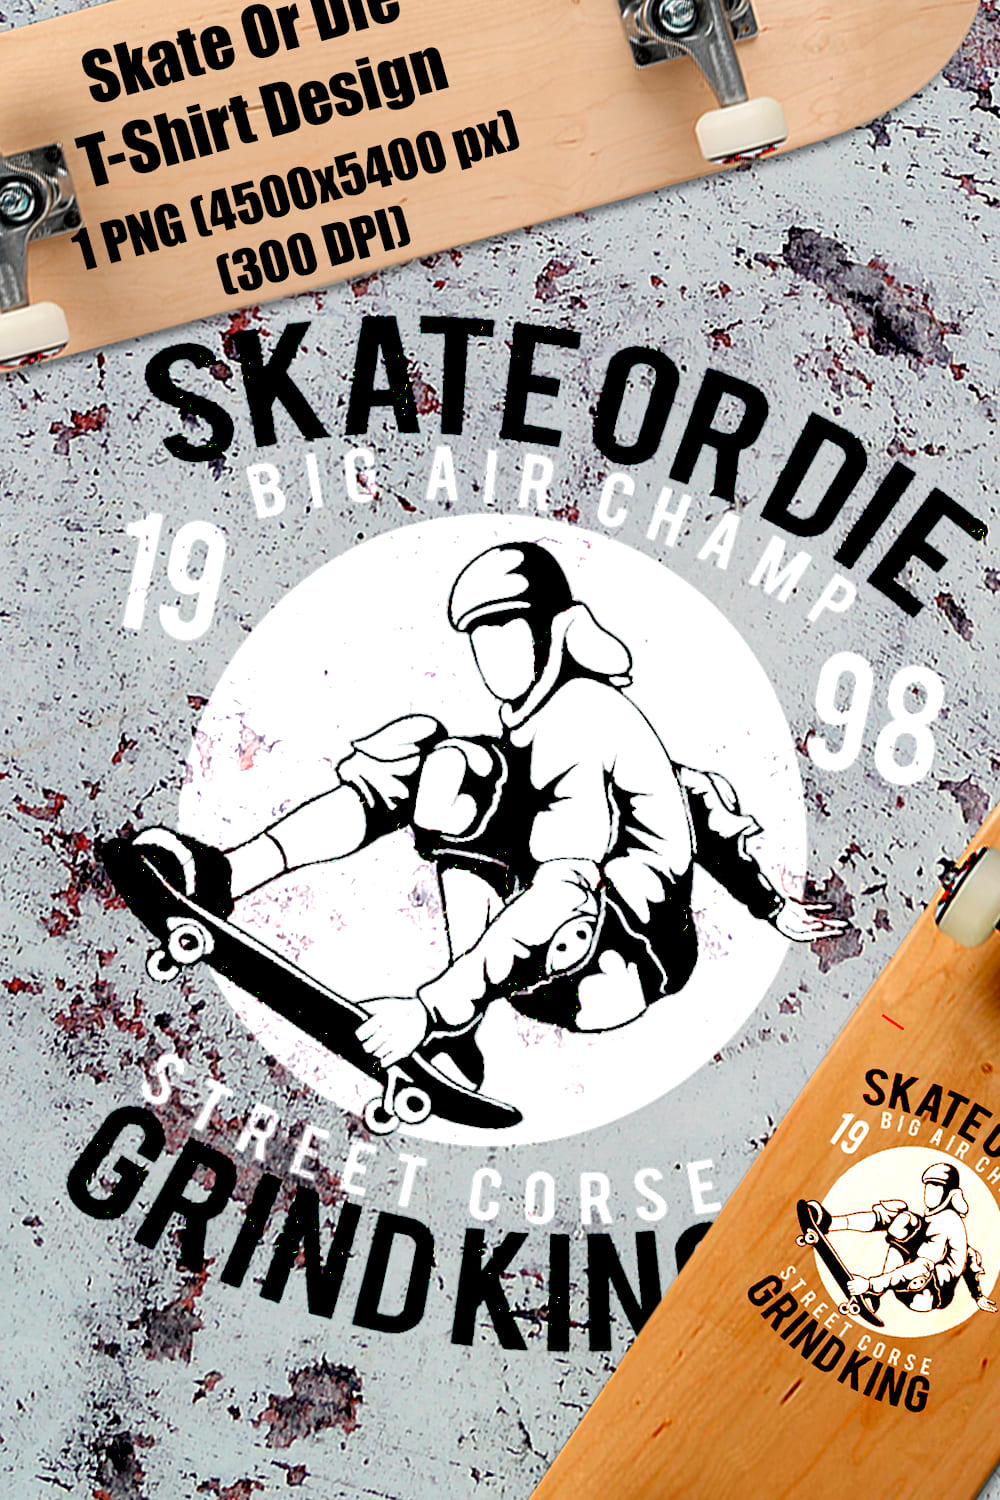 Irresistible image of a teenager on a skateboard and an inscription "Skate Or Die".